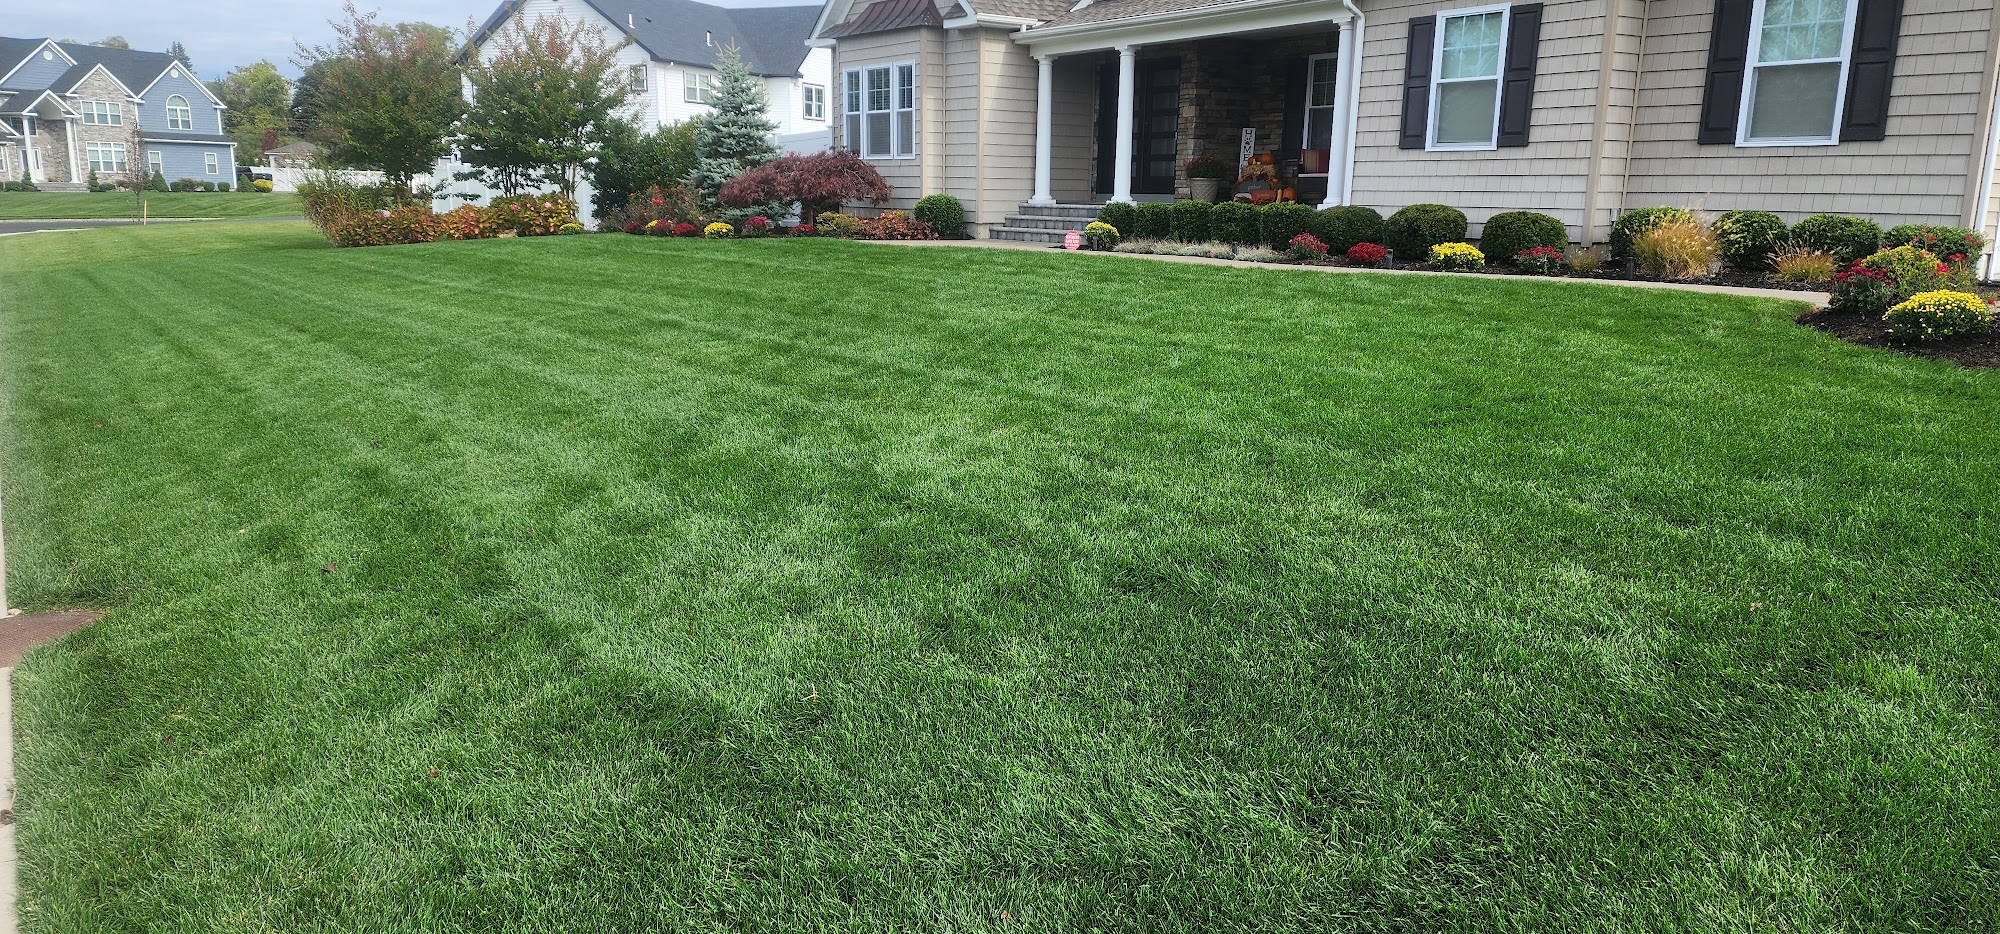 Making Solid Ground Lawn Care Inc